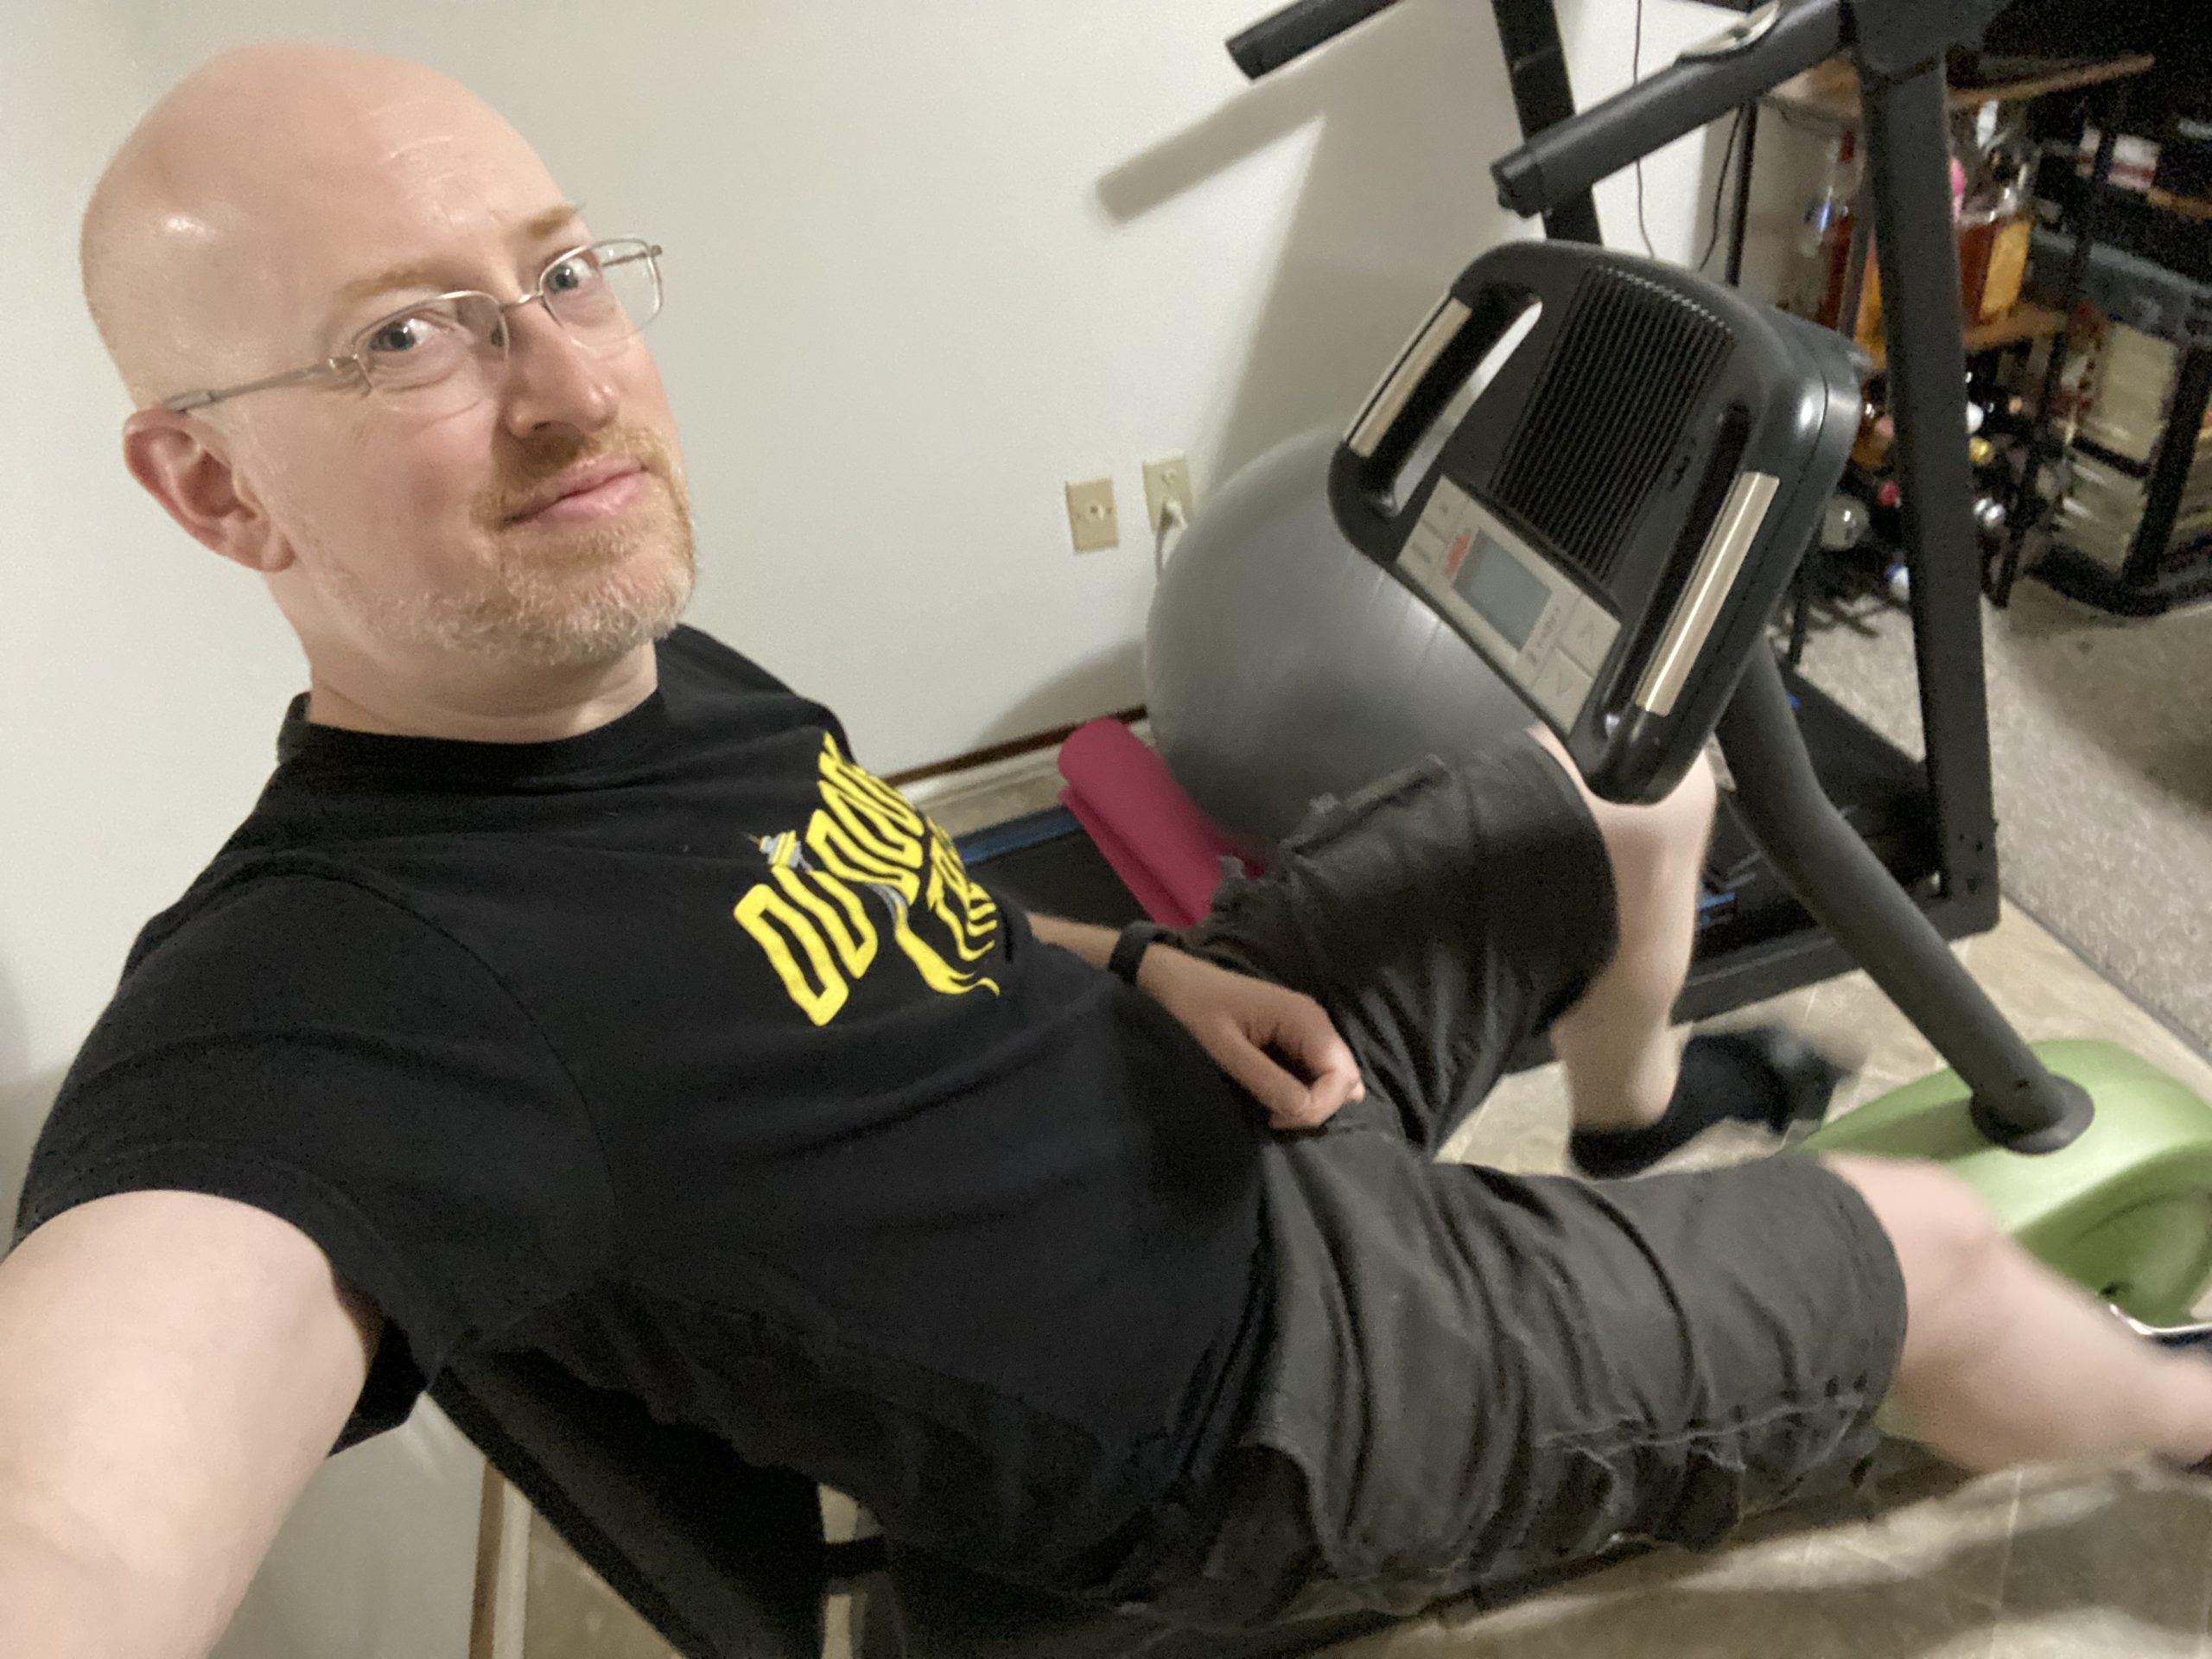 Me pedaling on a recumbant exercise bike; a treadmill is visible behind me.